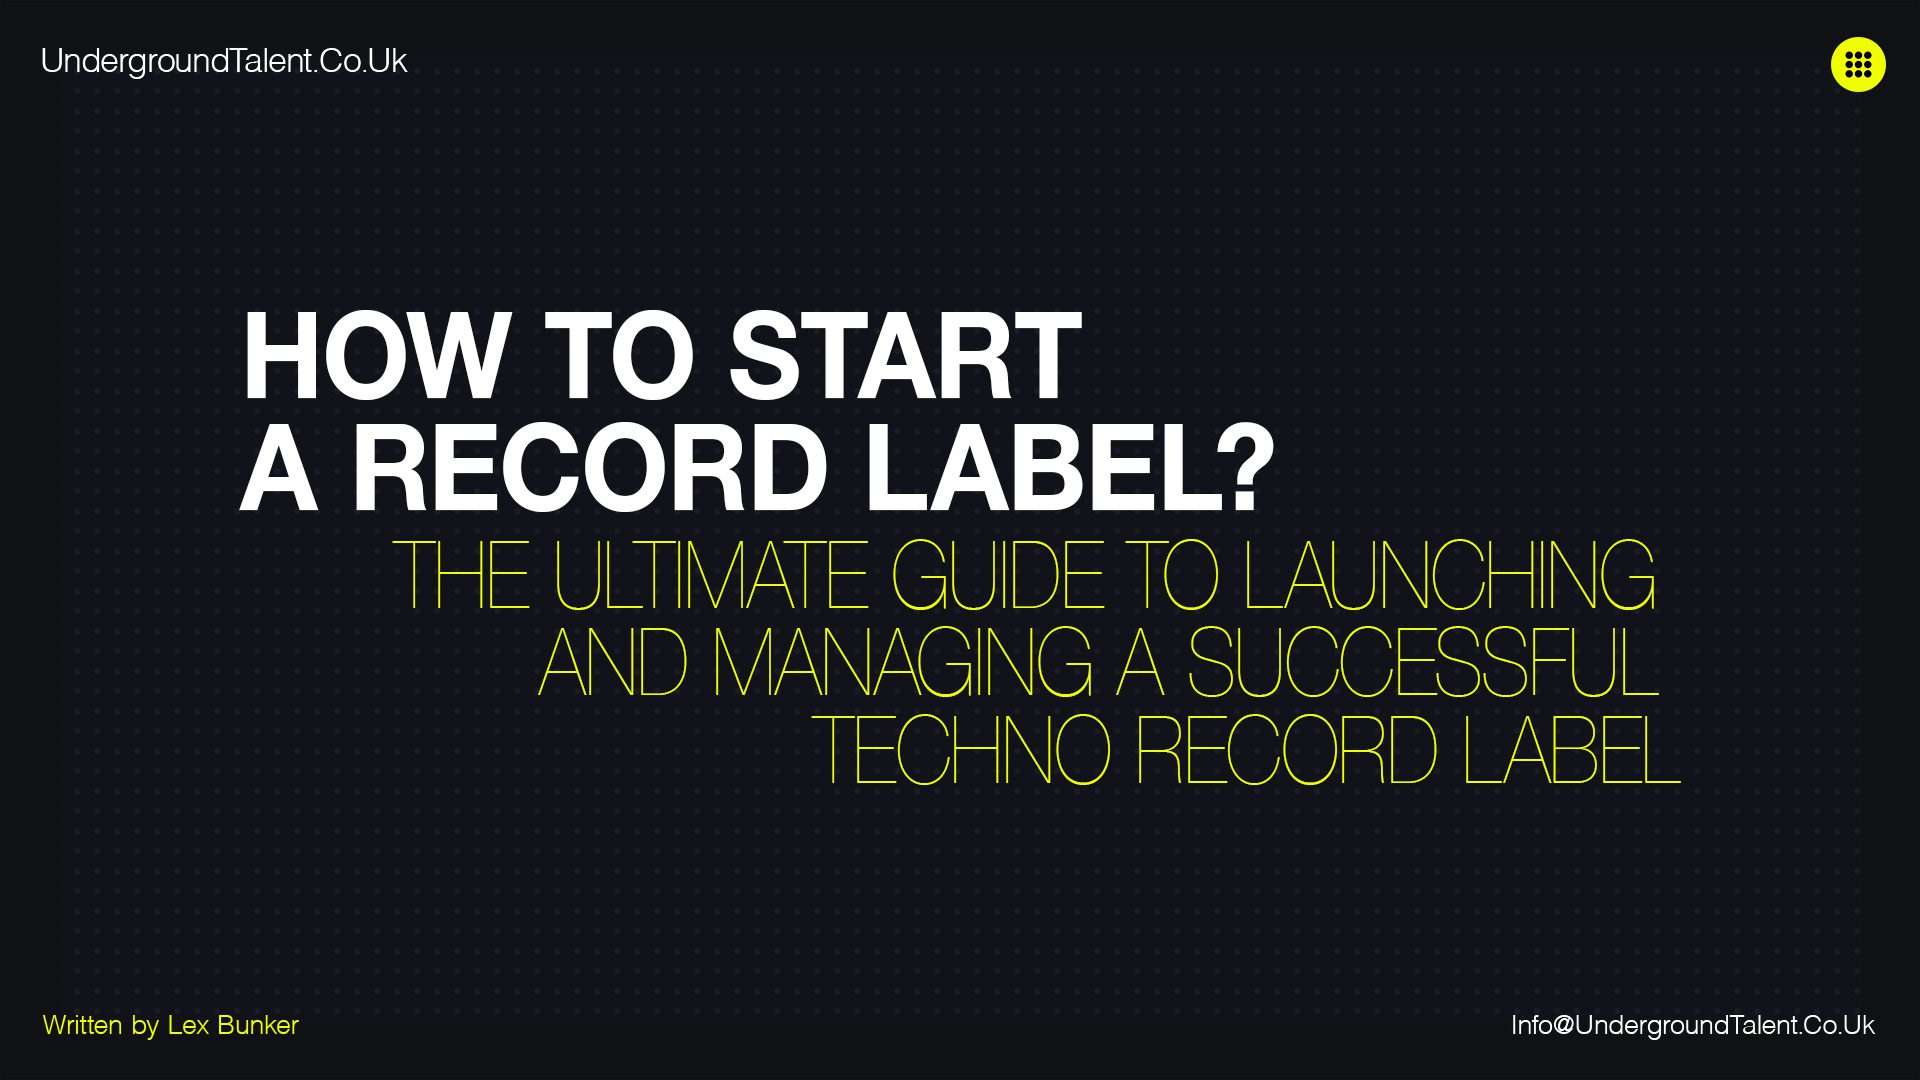 How to Start a Record Label? The Ultimate Techno Guide